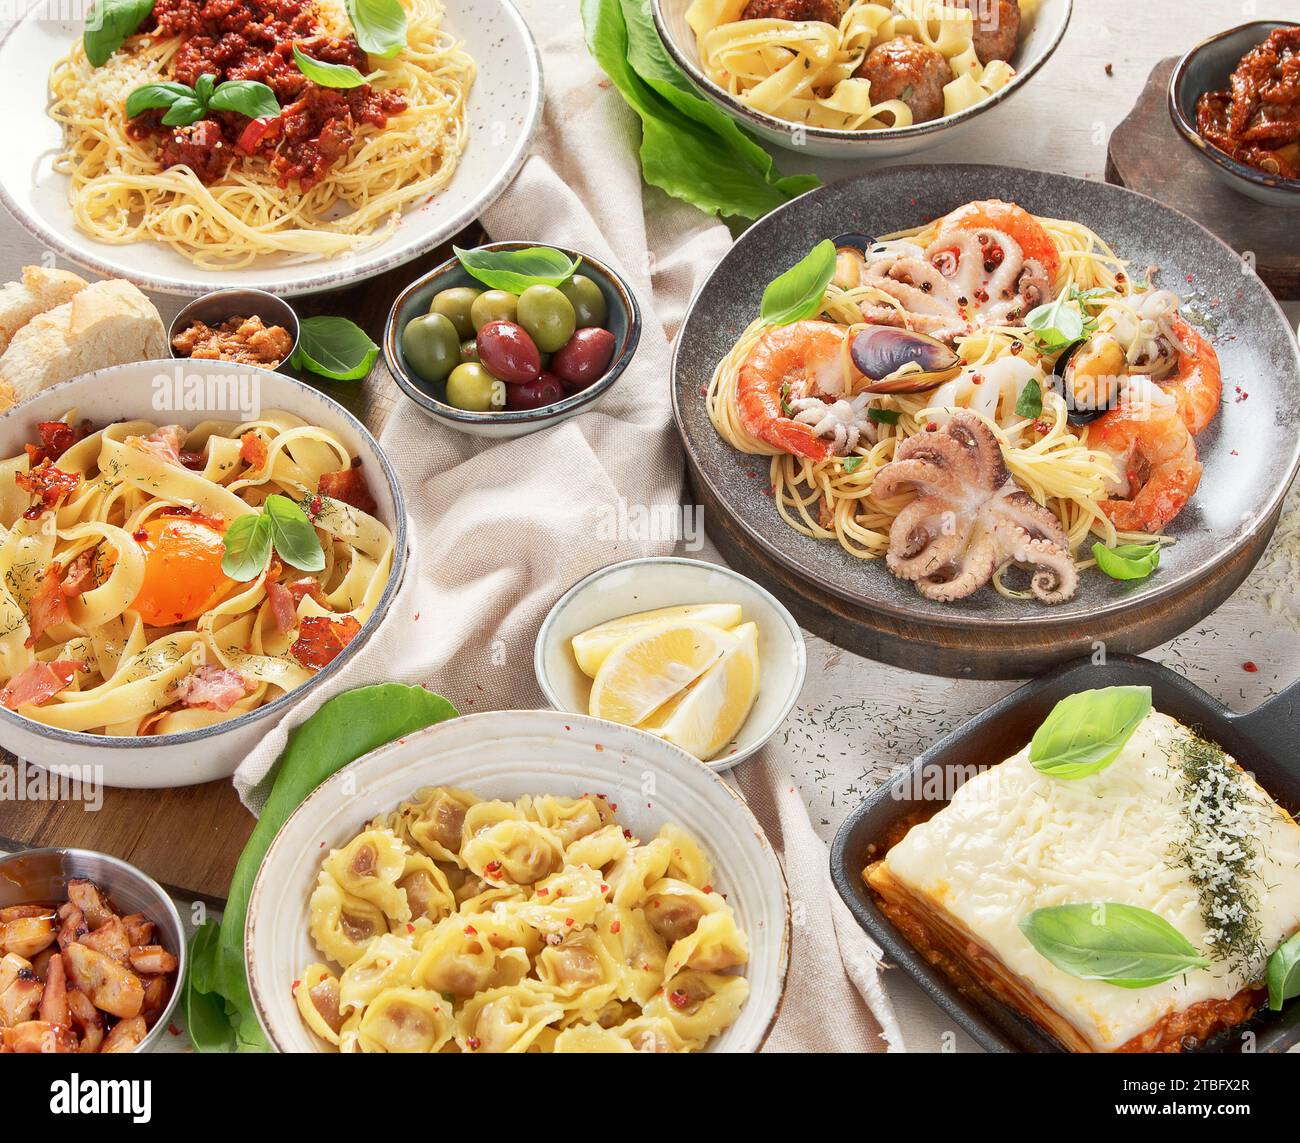 Assortment of Italian pasta dishes on light bachground. Traditional food concept. Stock Photo